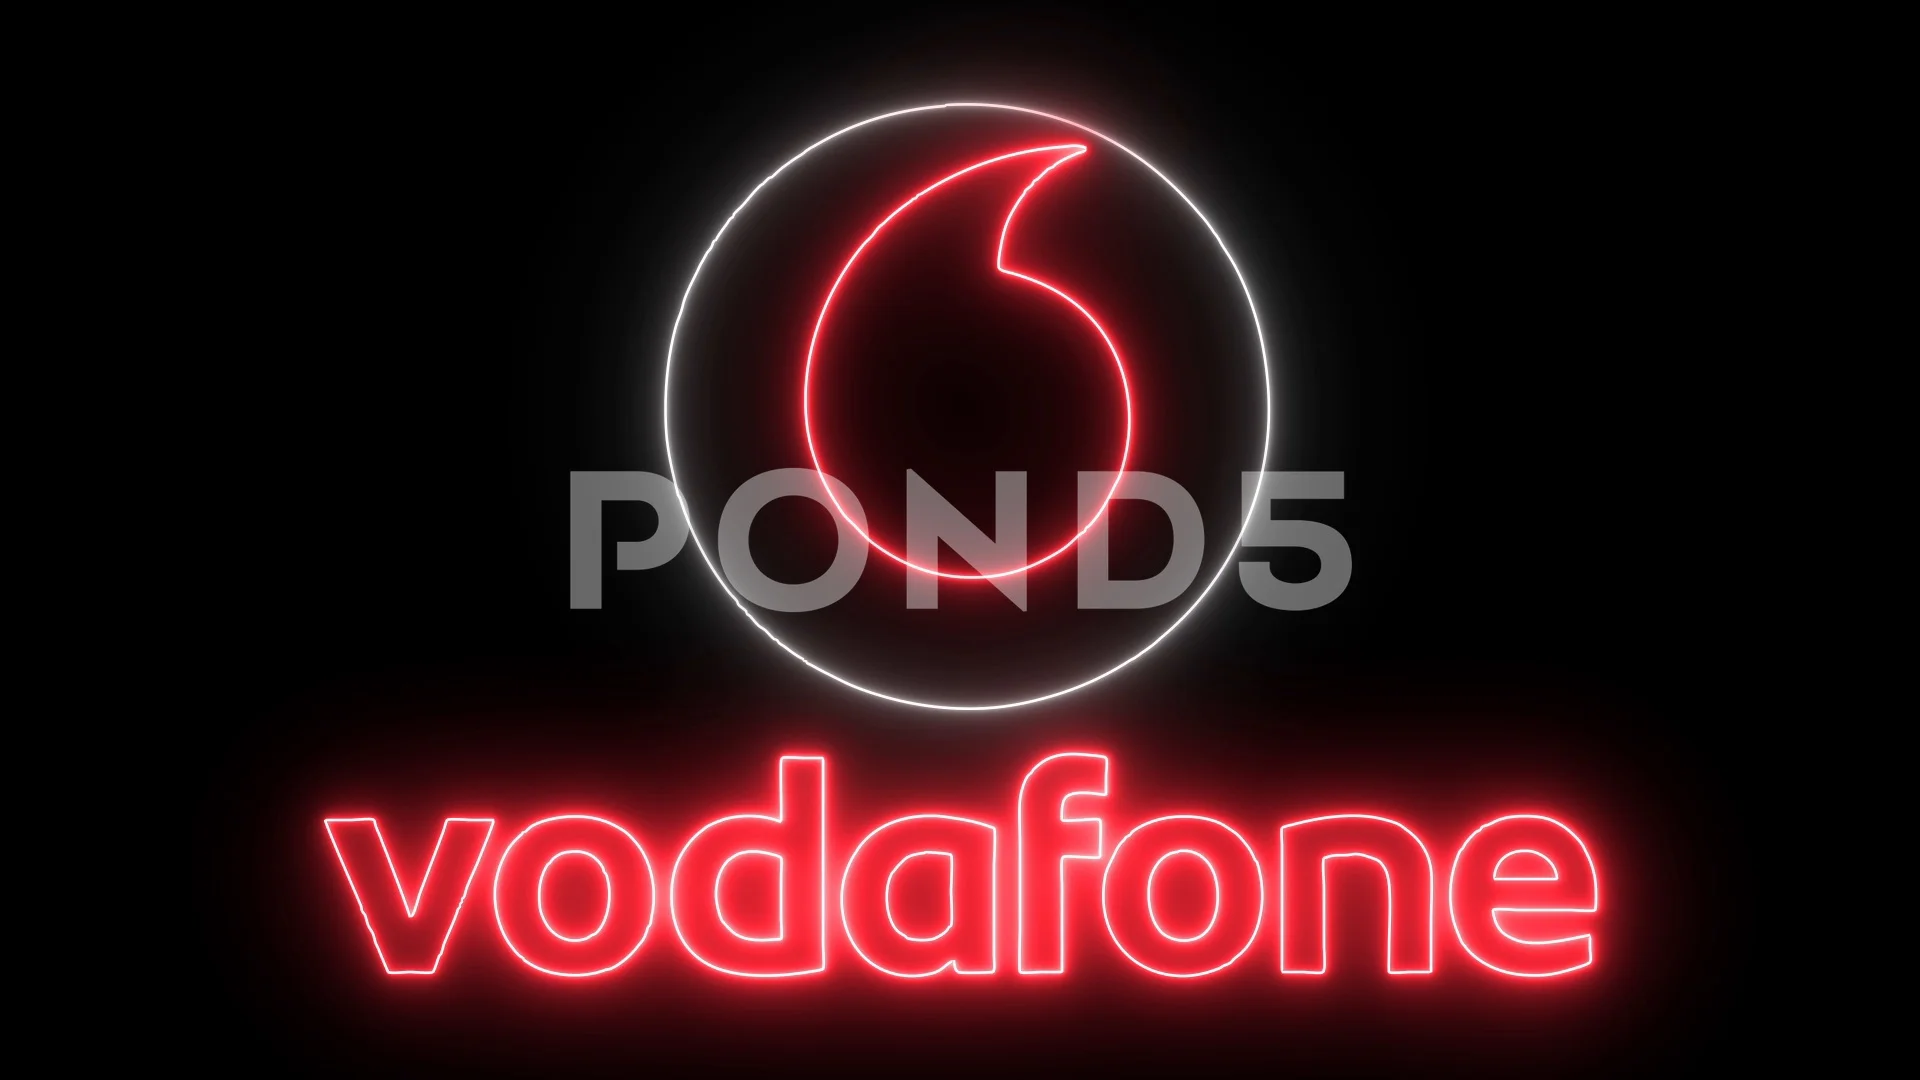 Vodafone Logo With neon Lights | Stock Video | Pond5